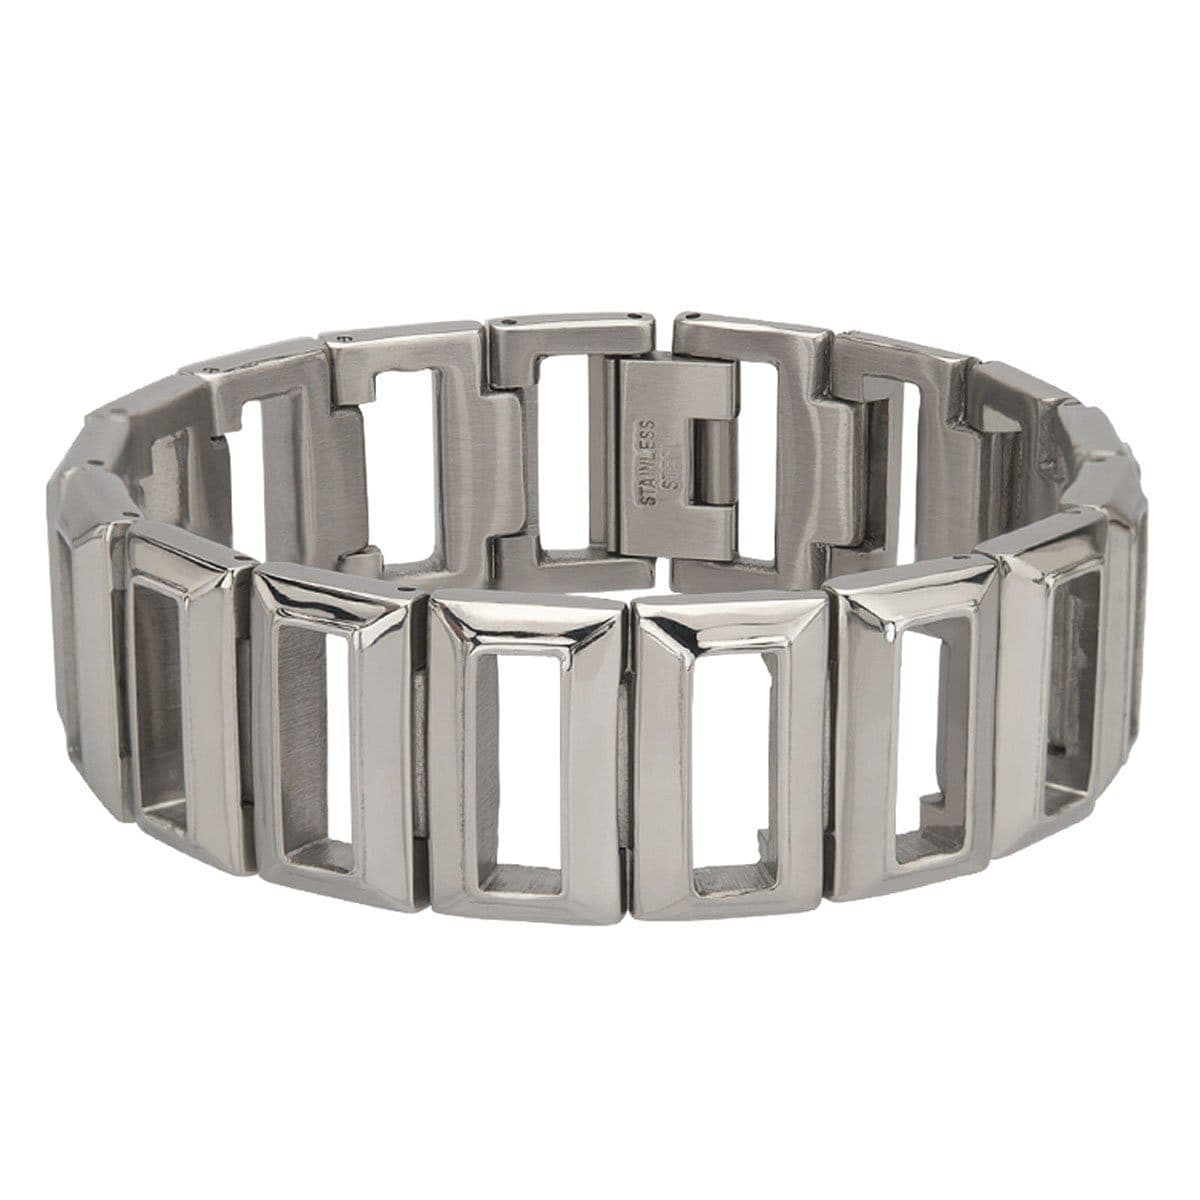 INOX JEWELRY Bracelets Silver Tone Stainless Steel Elongated Rectangle Cut-Out Link Bracelet BR9239